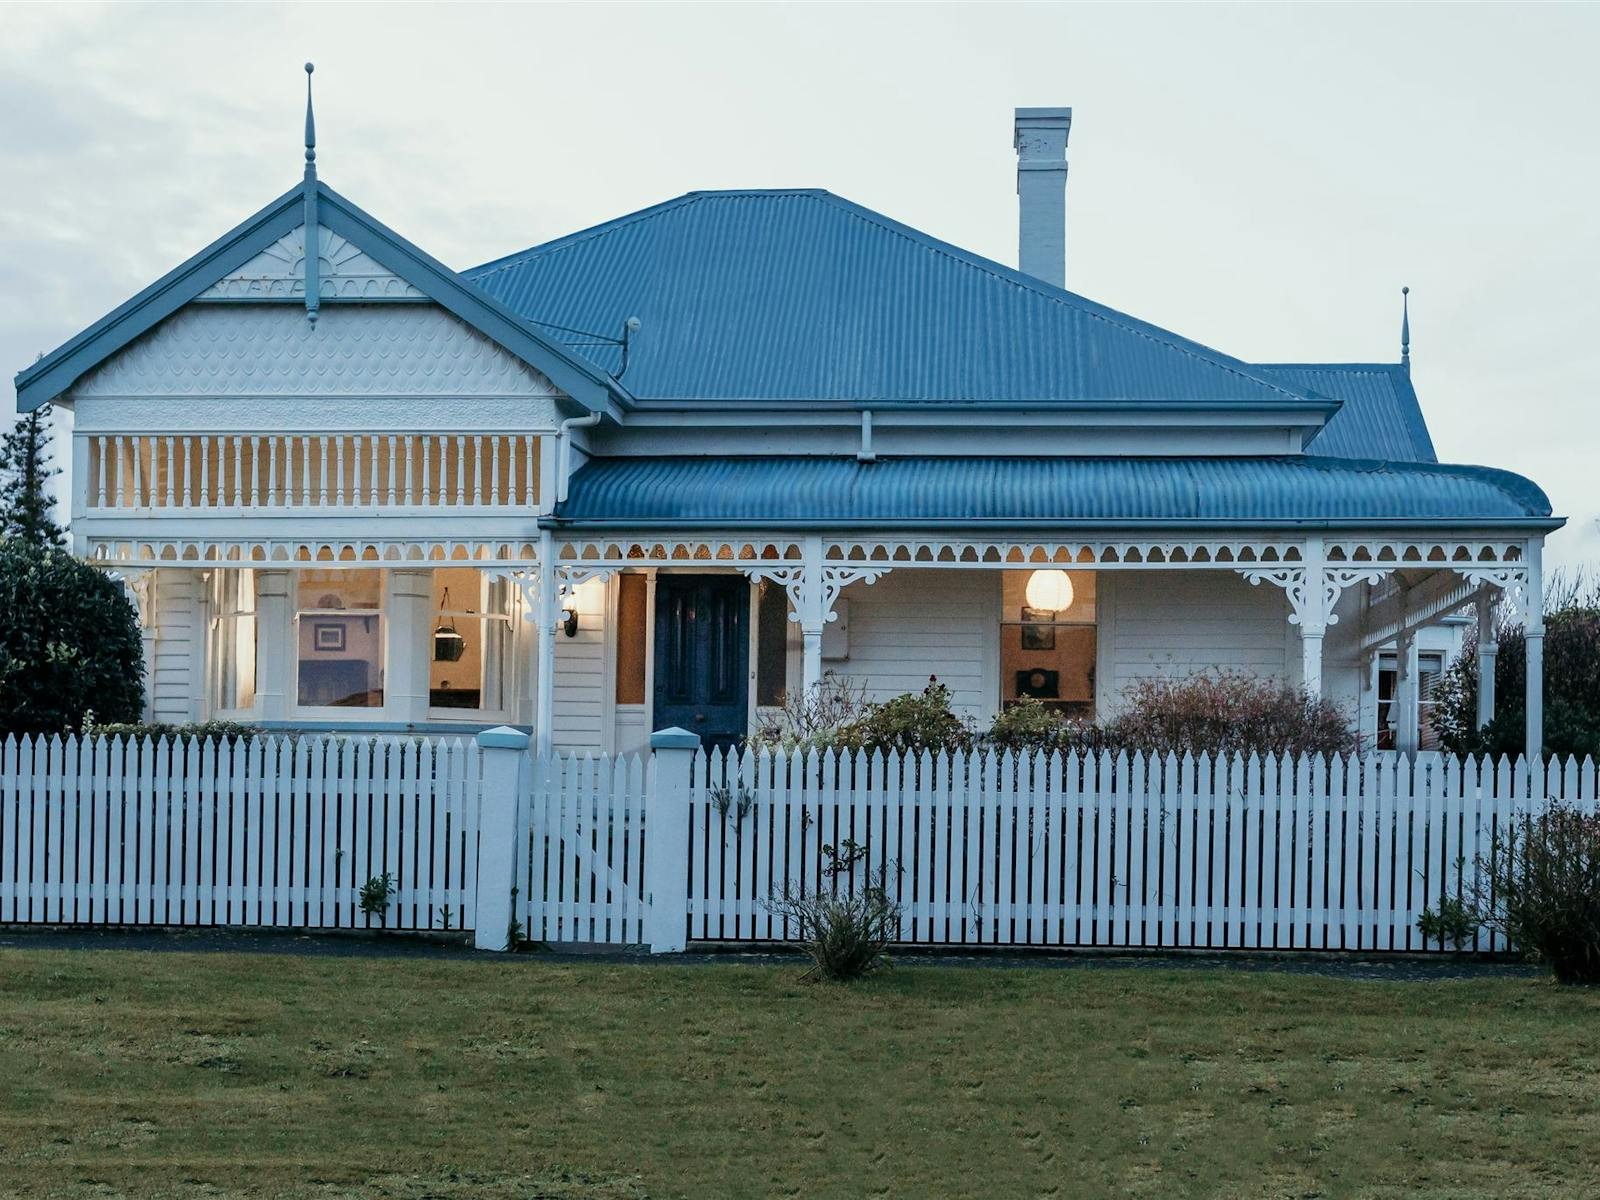 3 house, owned by 3 generations, well loved and cared for, great garden, white picket fence